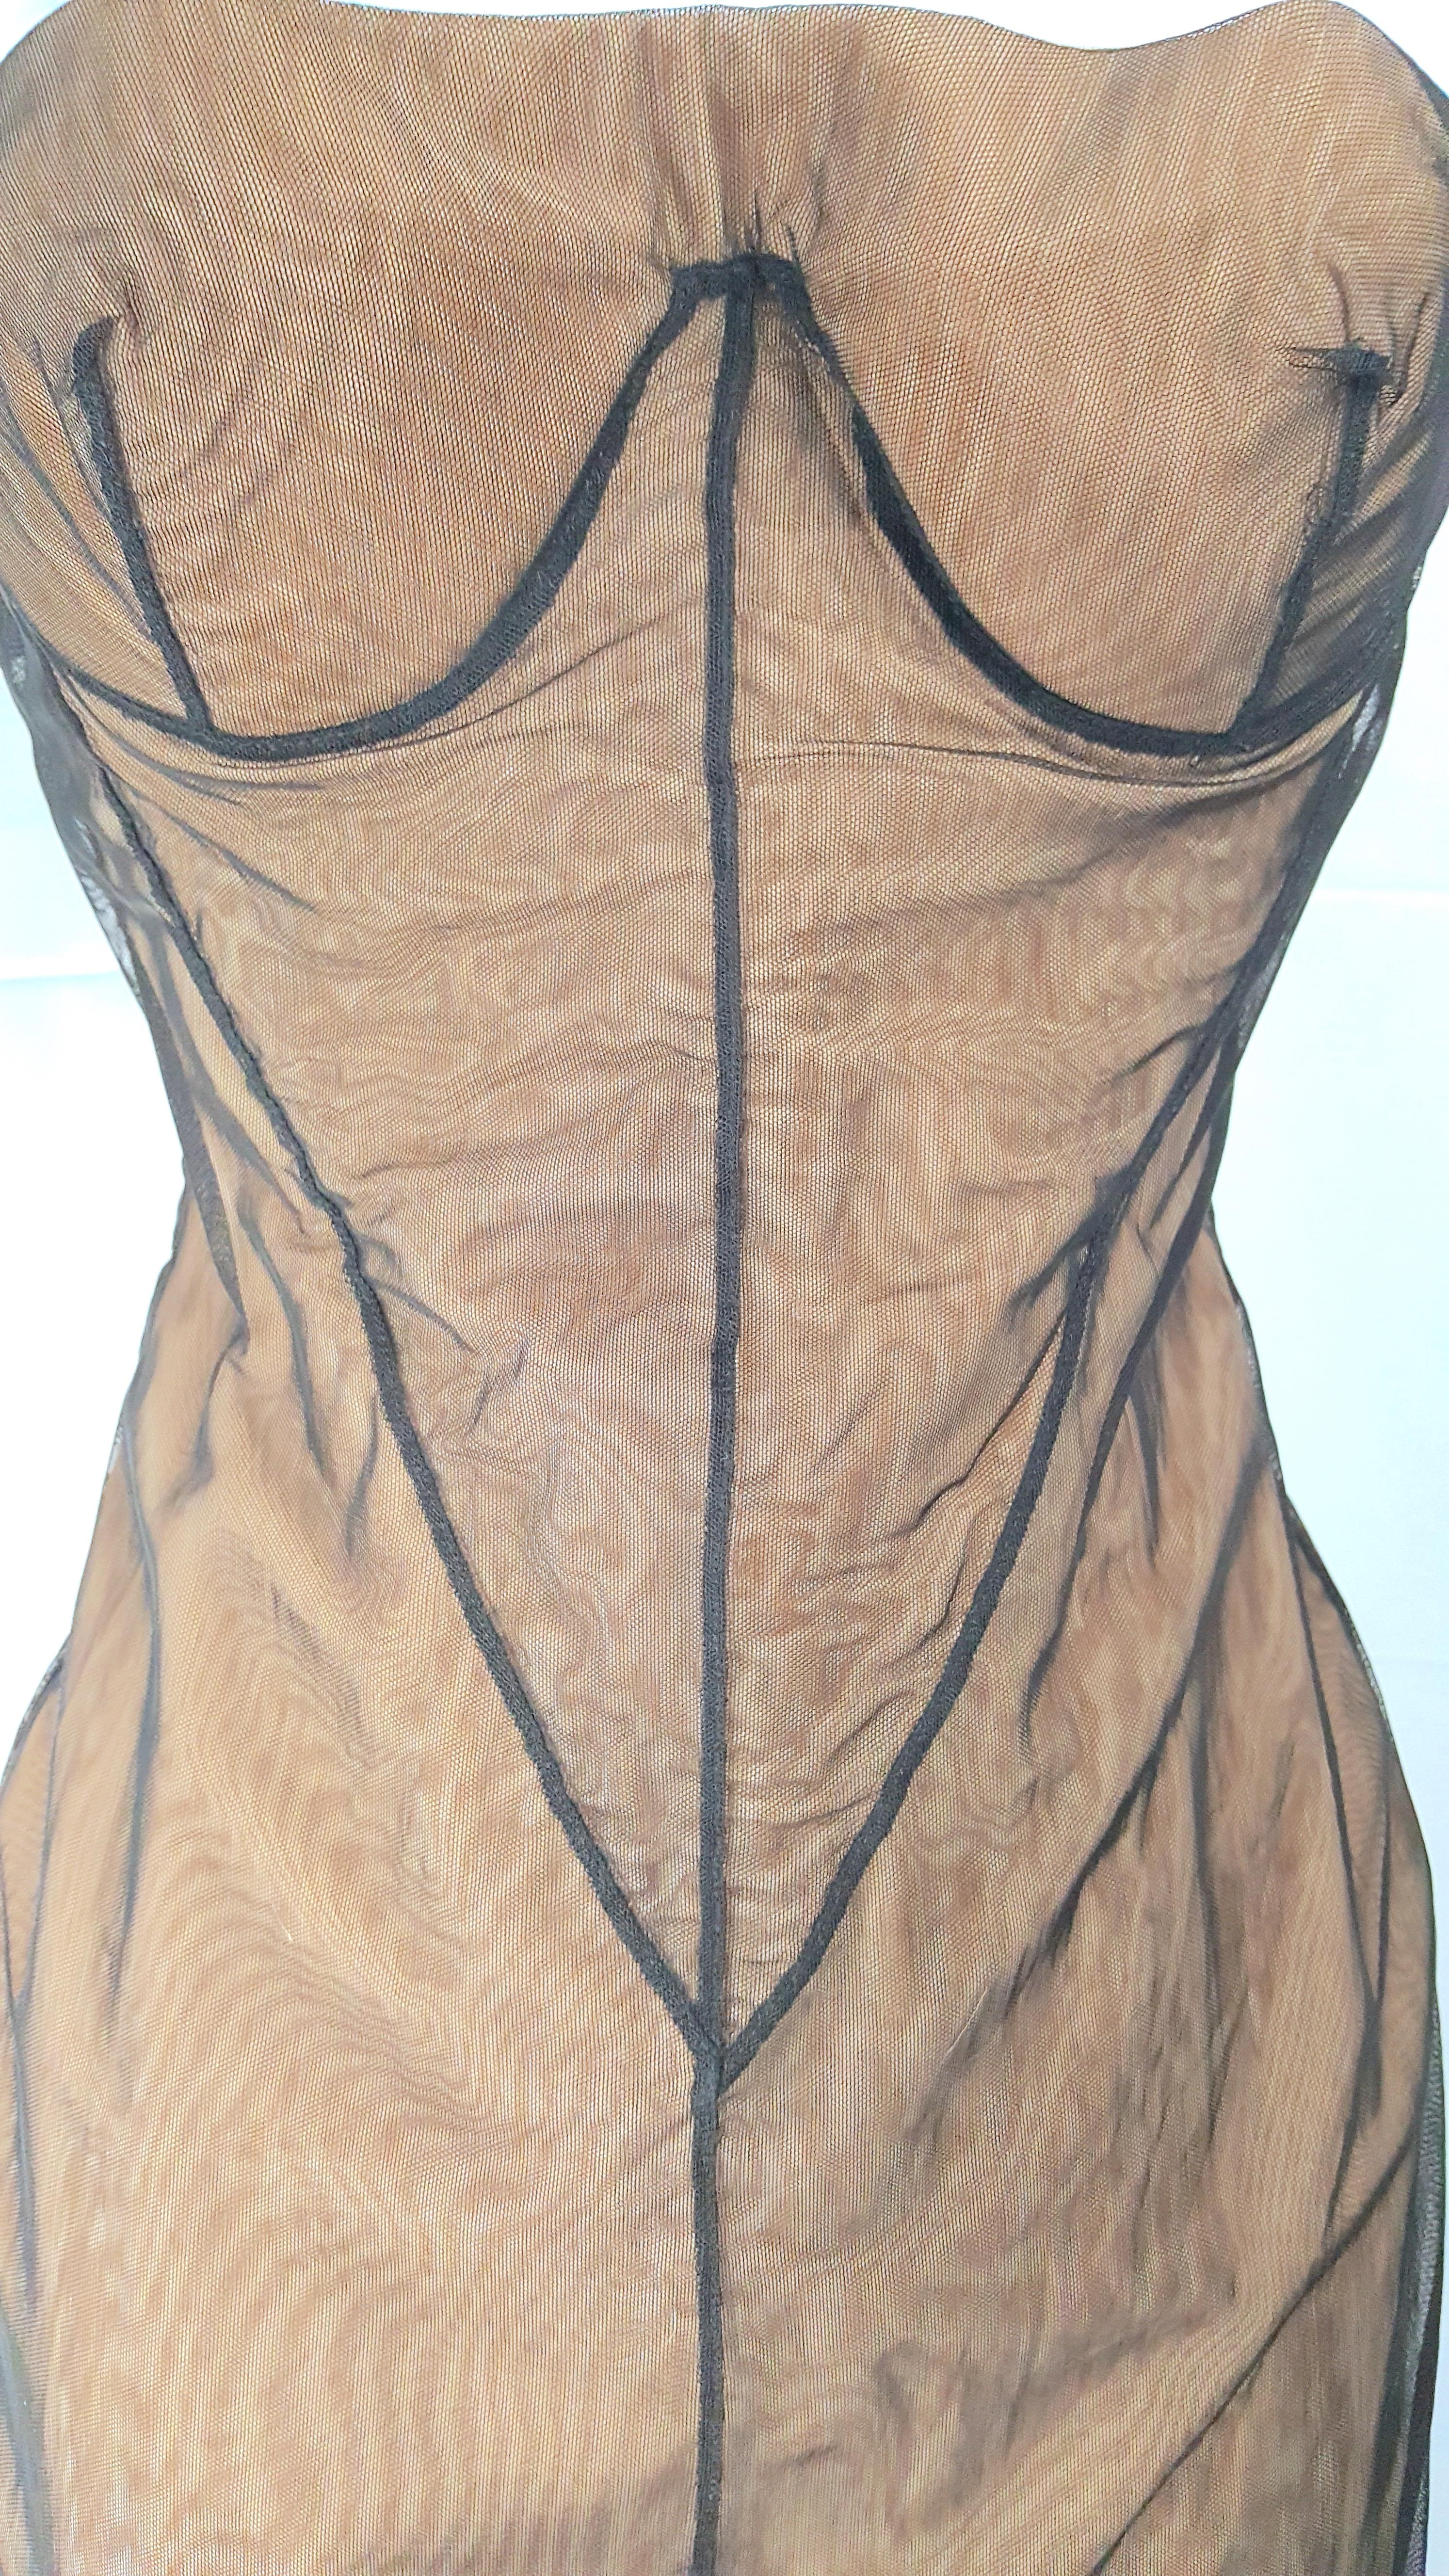 Gucci TomFord 2001 AwardYear RunwayLook2 Balconette Corset Strapless Nude Dress For Sale 8